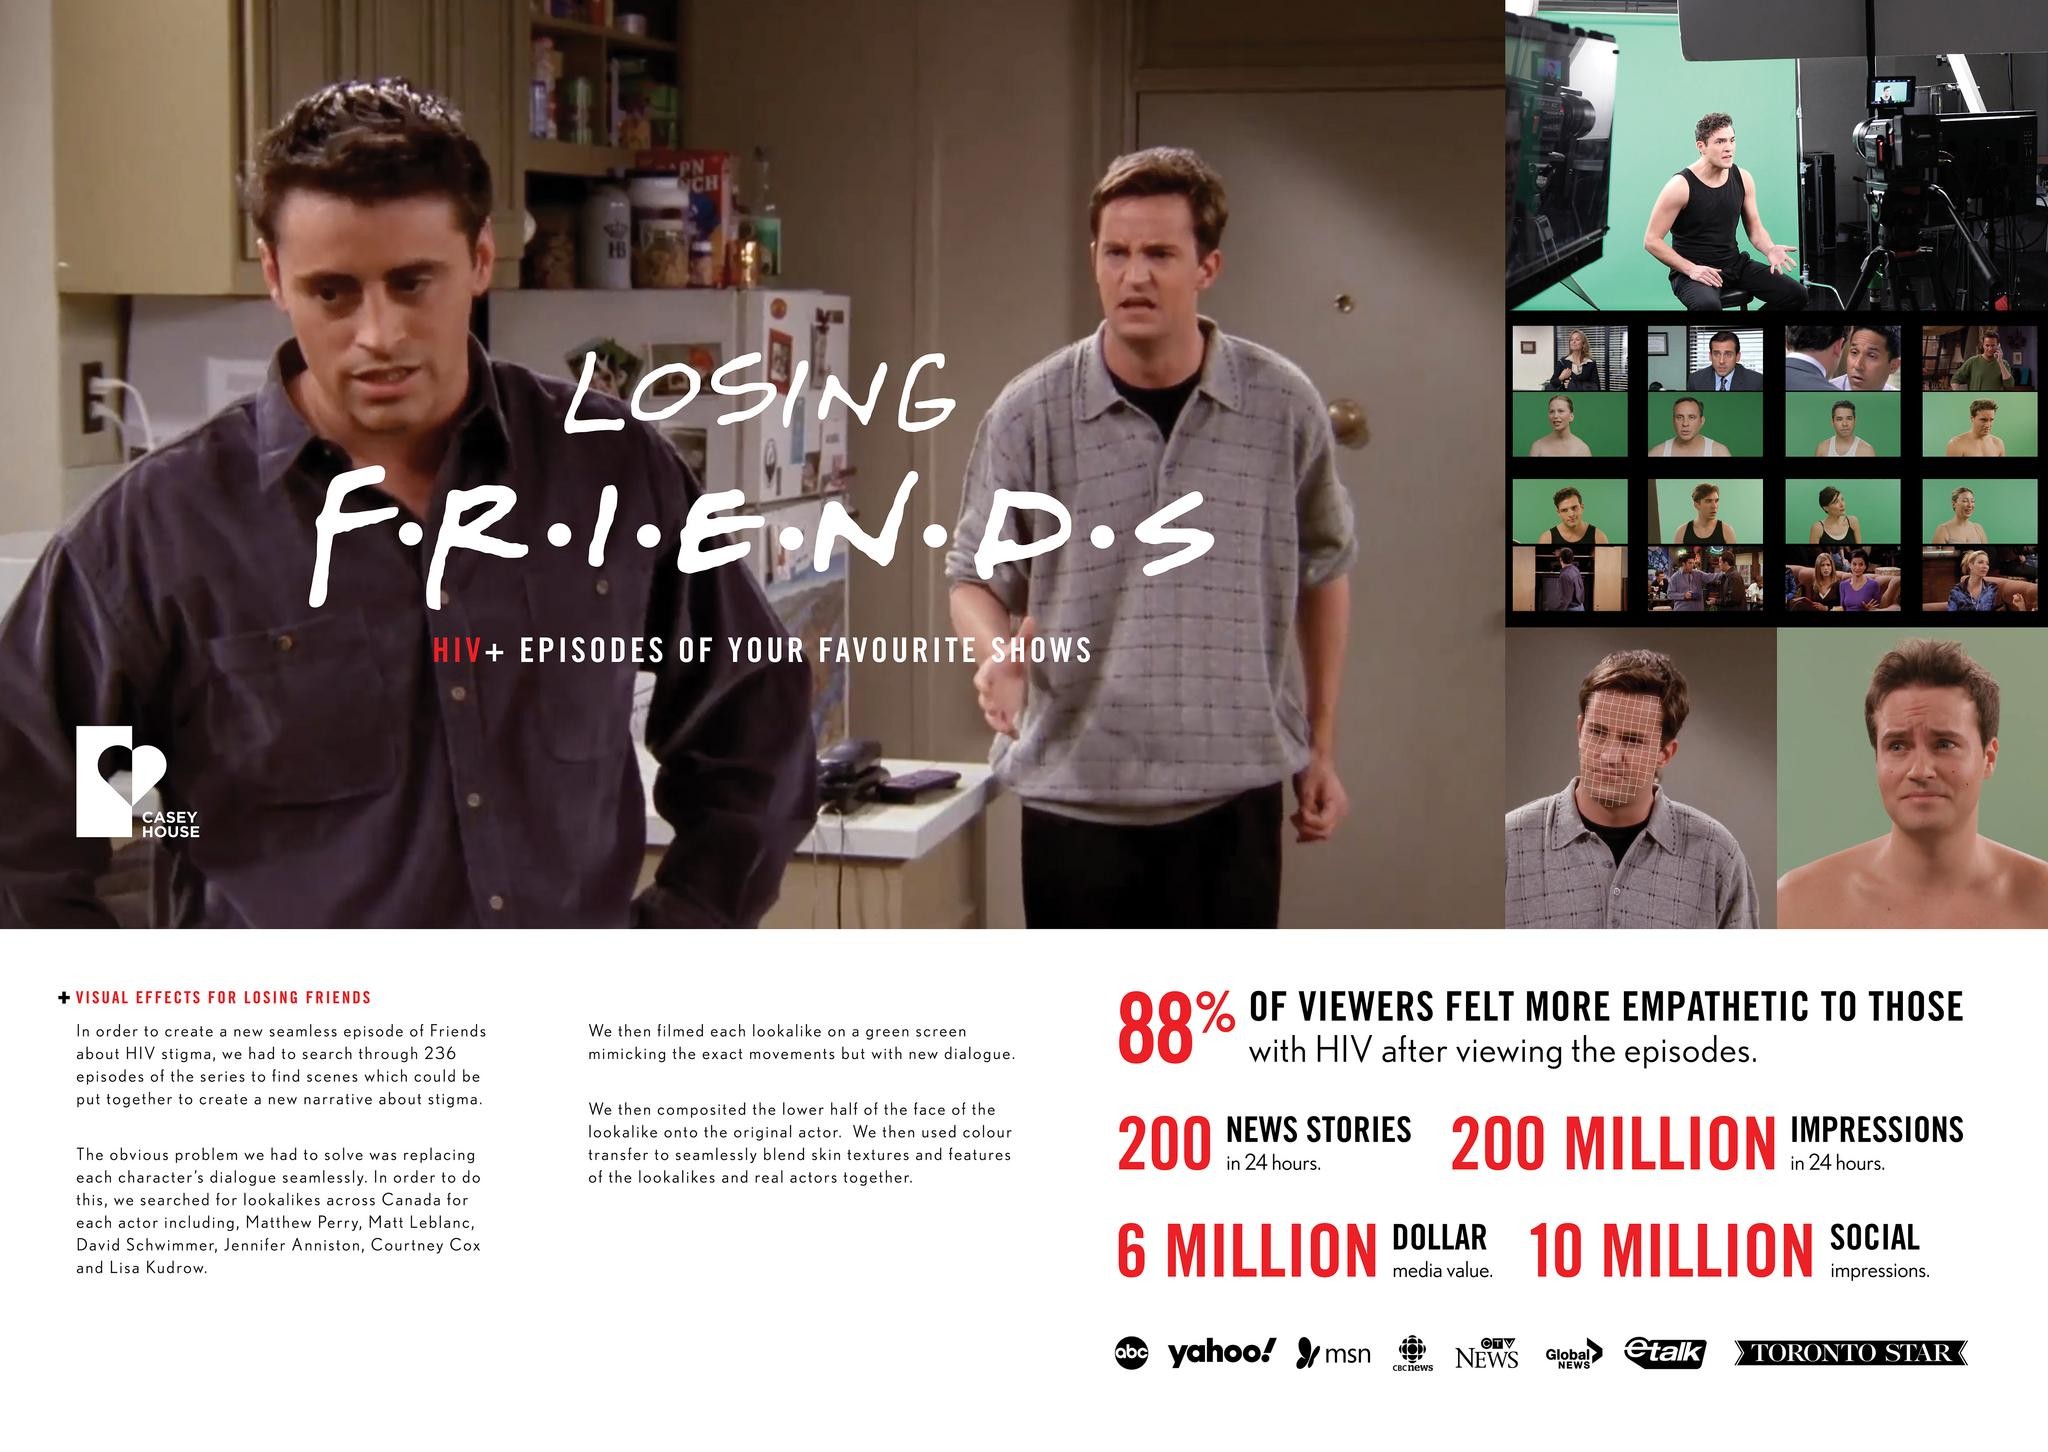 THE HIV+ EPISODES "LOSING FRIENDS"